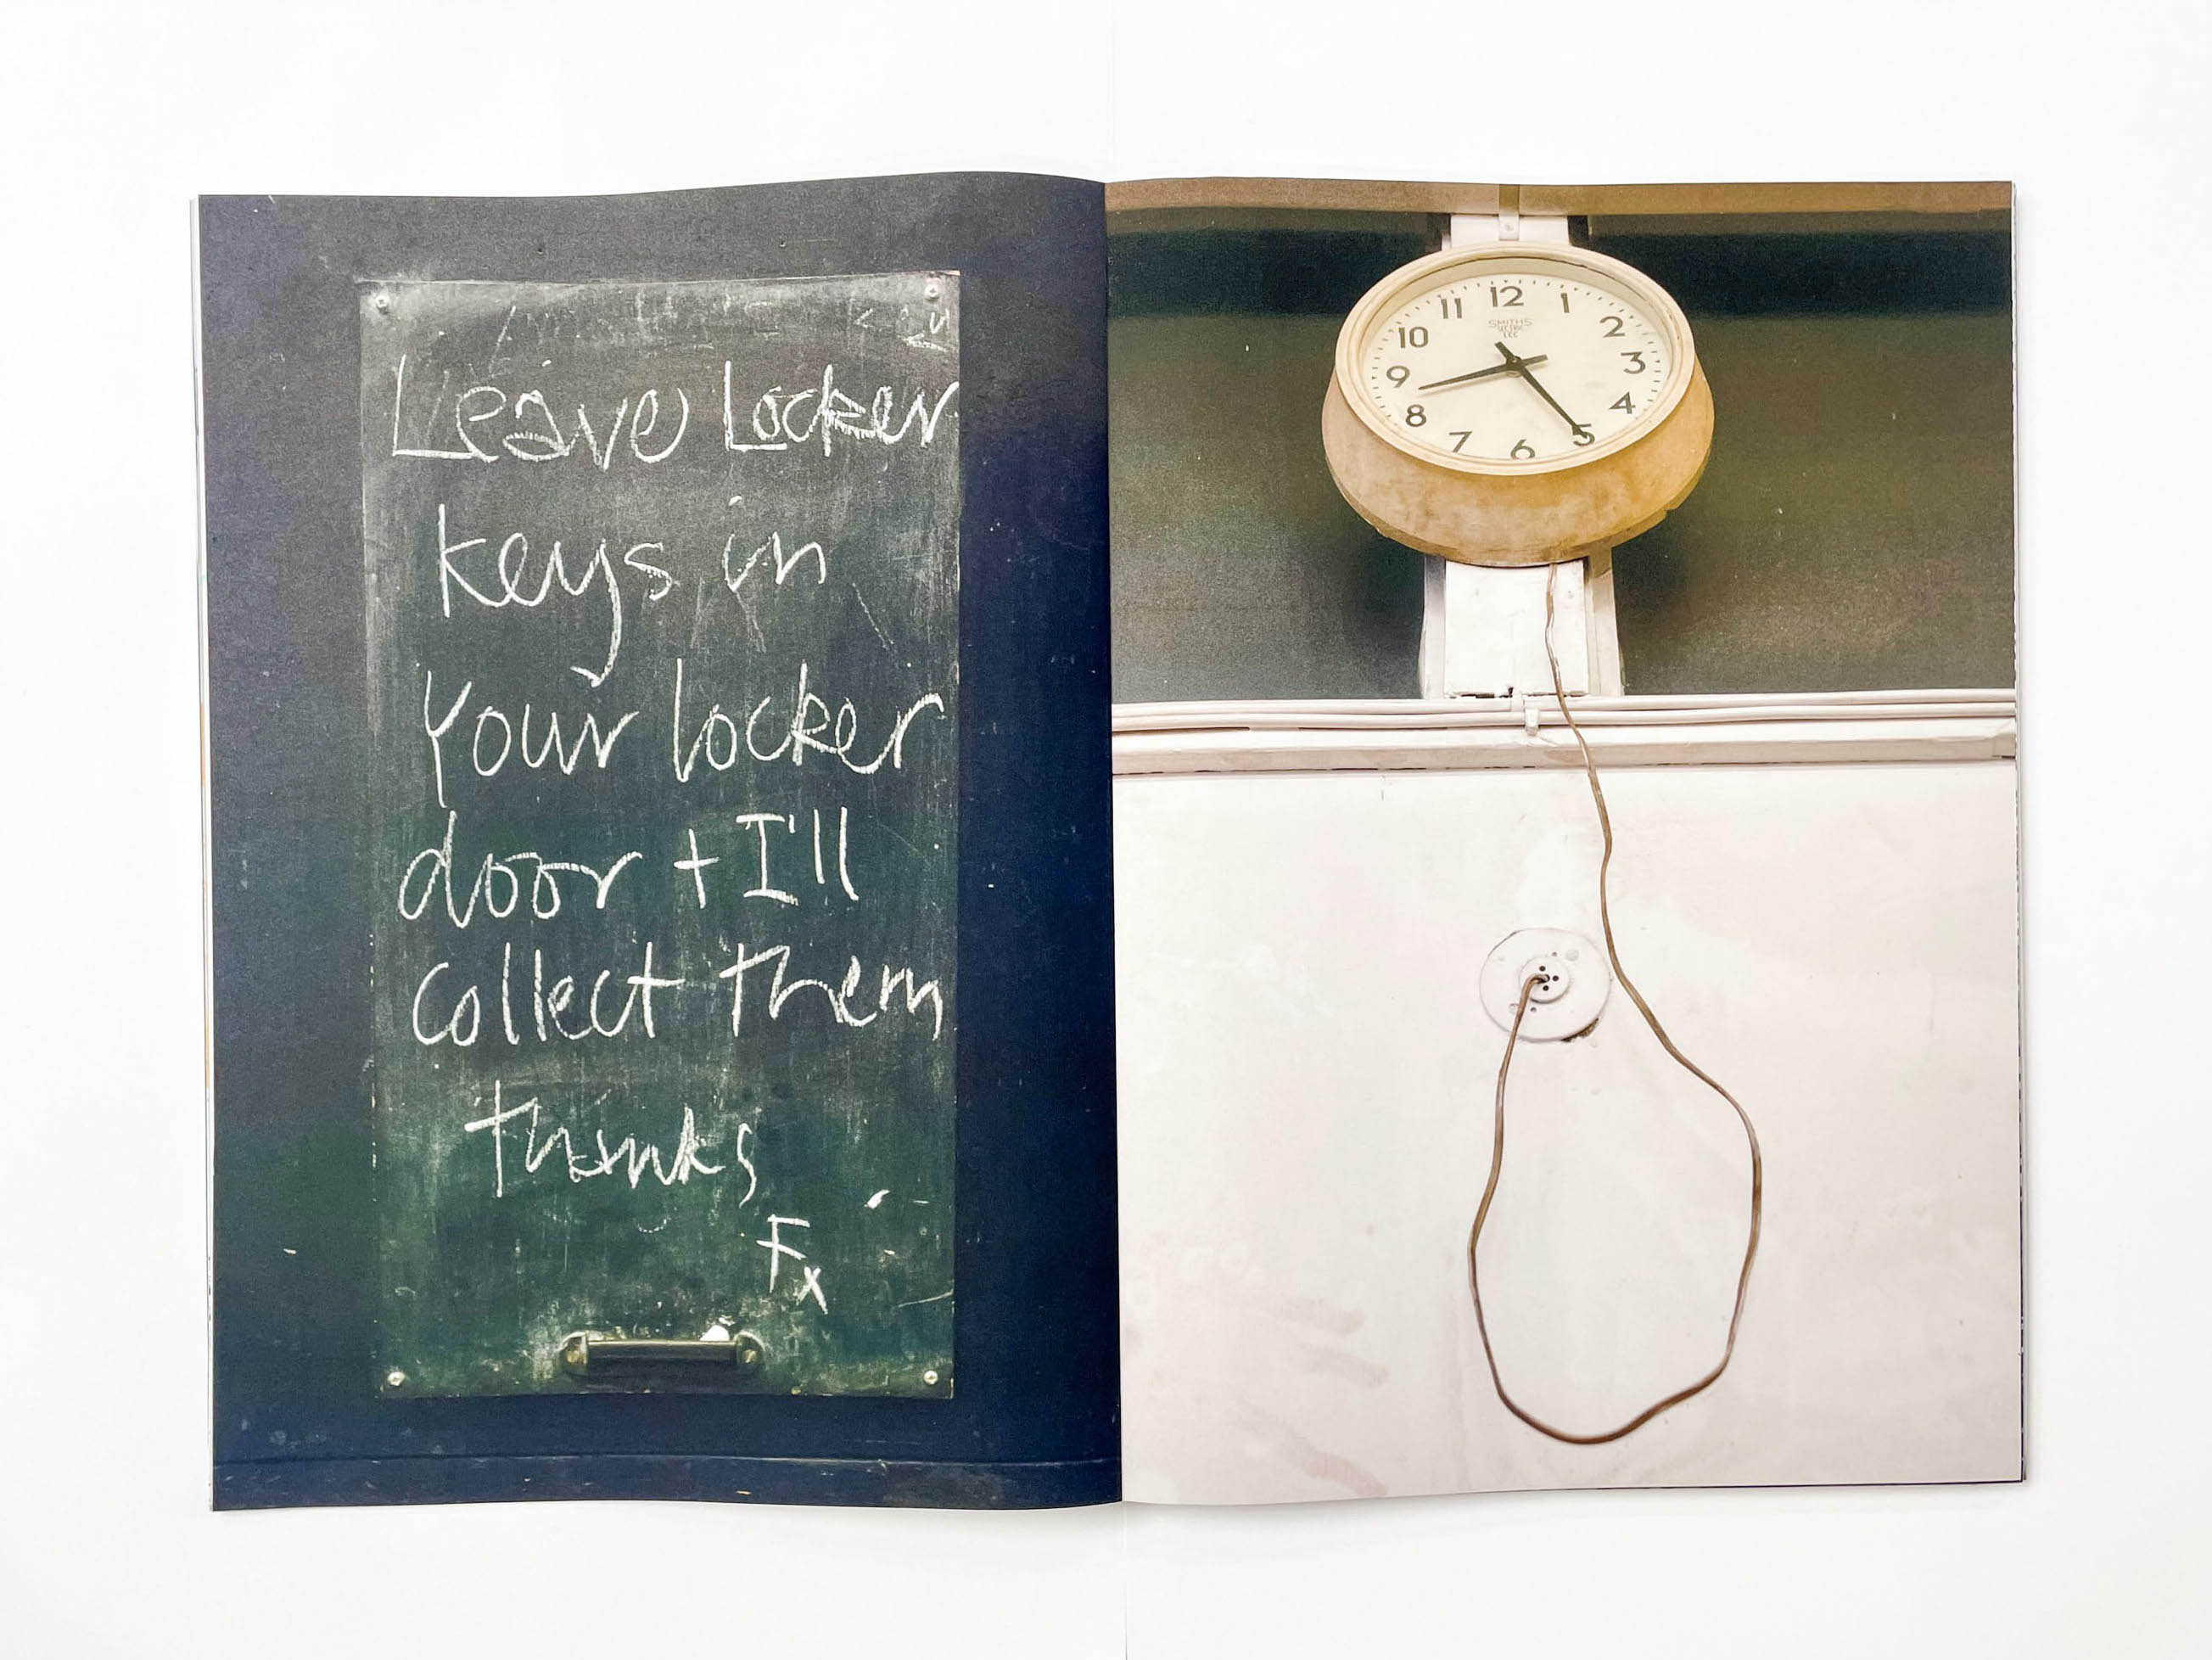 two photos - on the left a black chalkboard  with the handwritten message - Leave Locker keys in your locker door + I'll return them thanks F x; on the right a clock with the time 8.25'